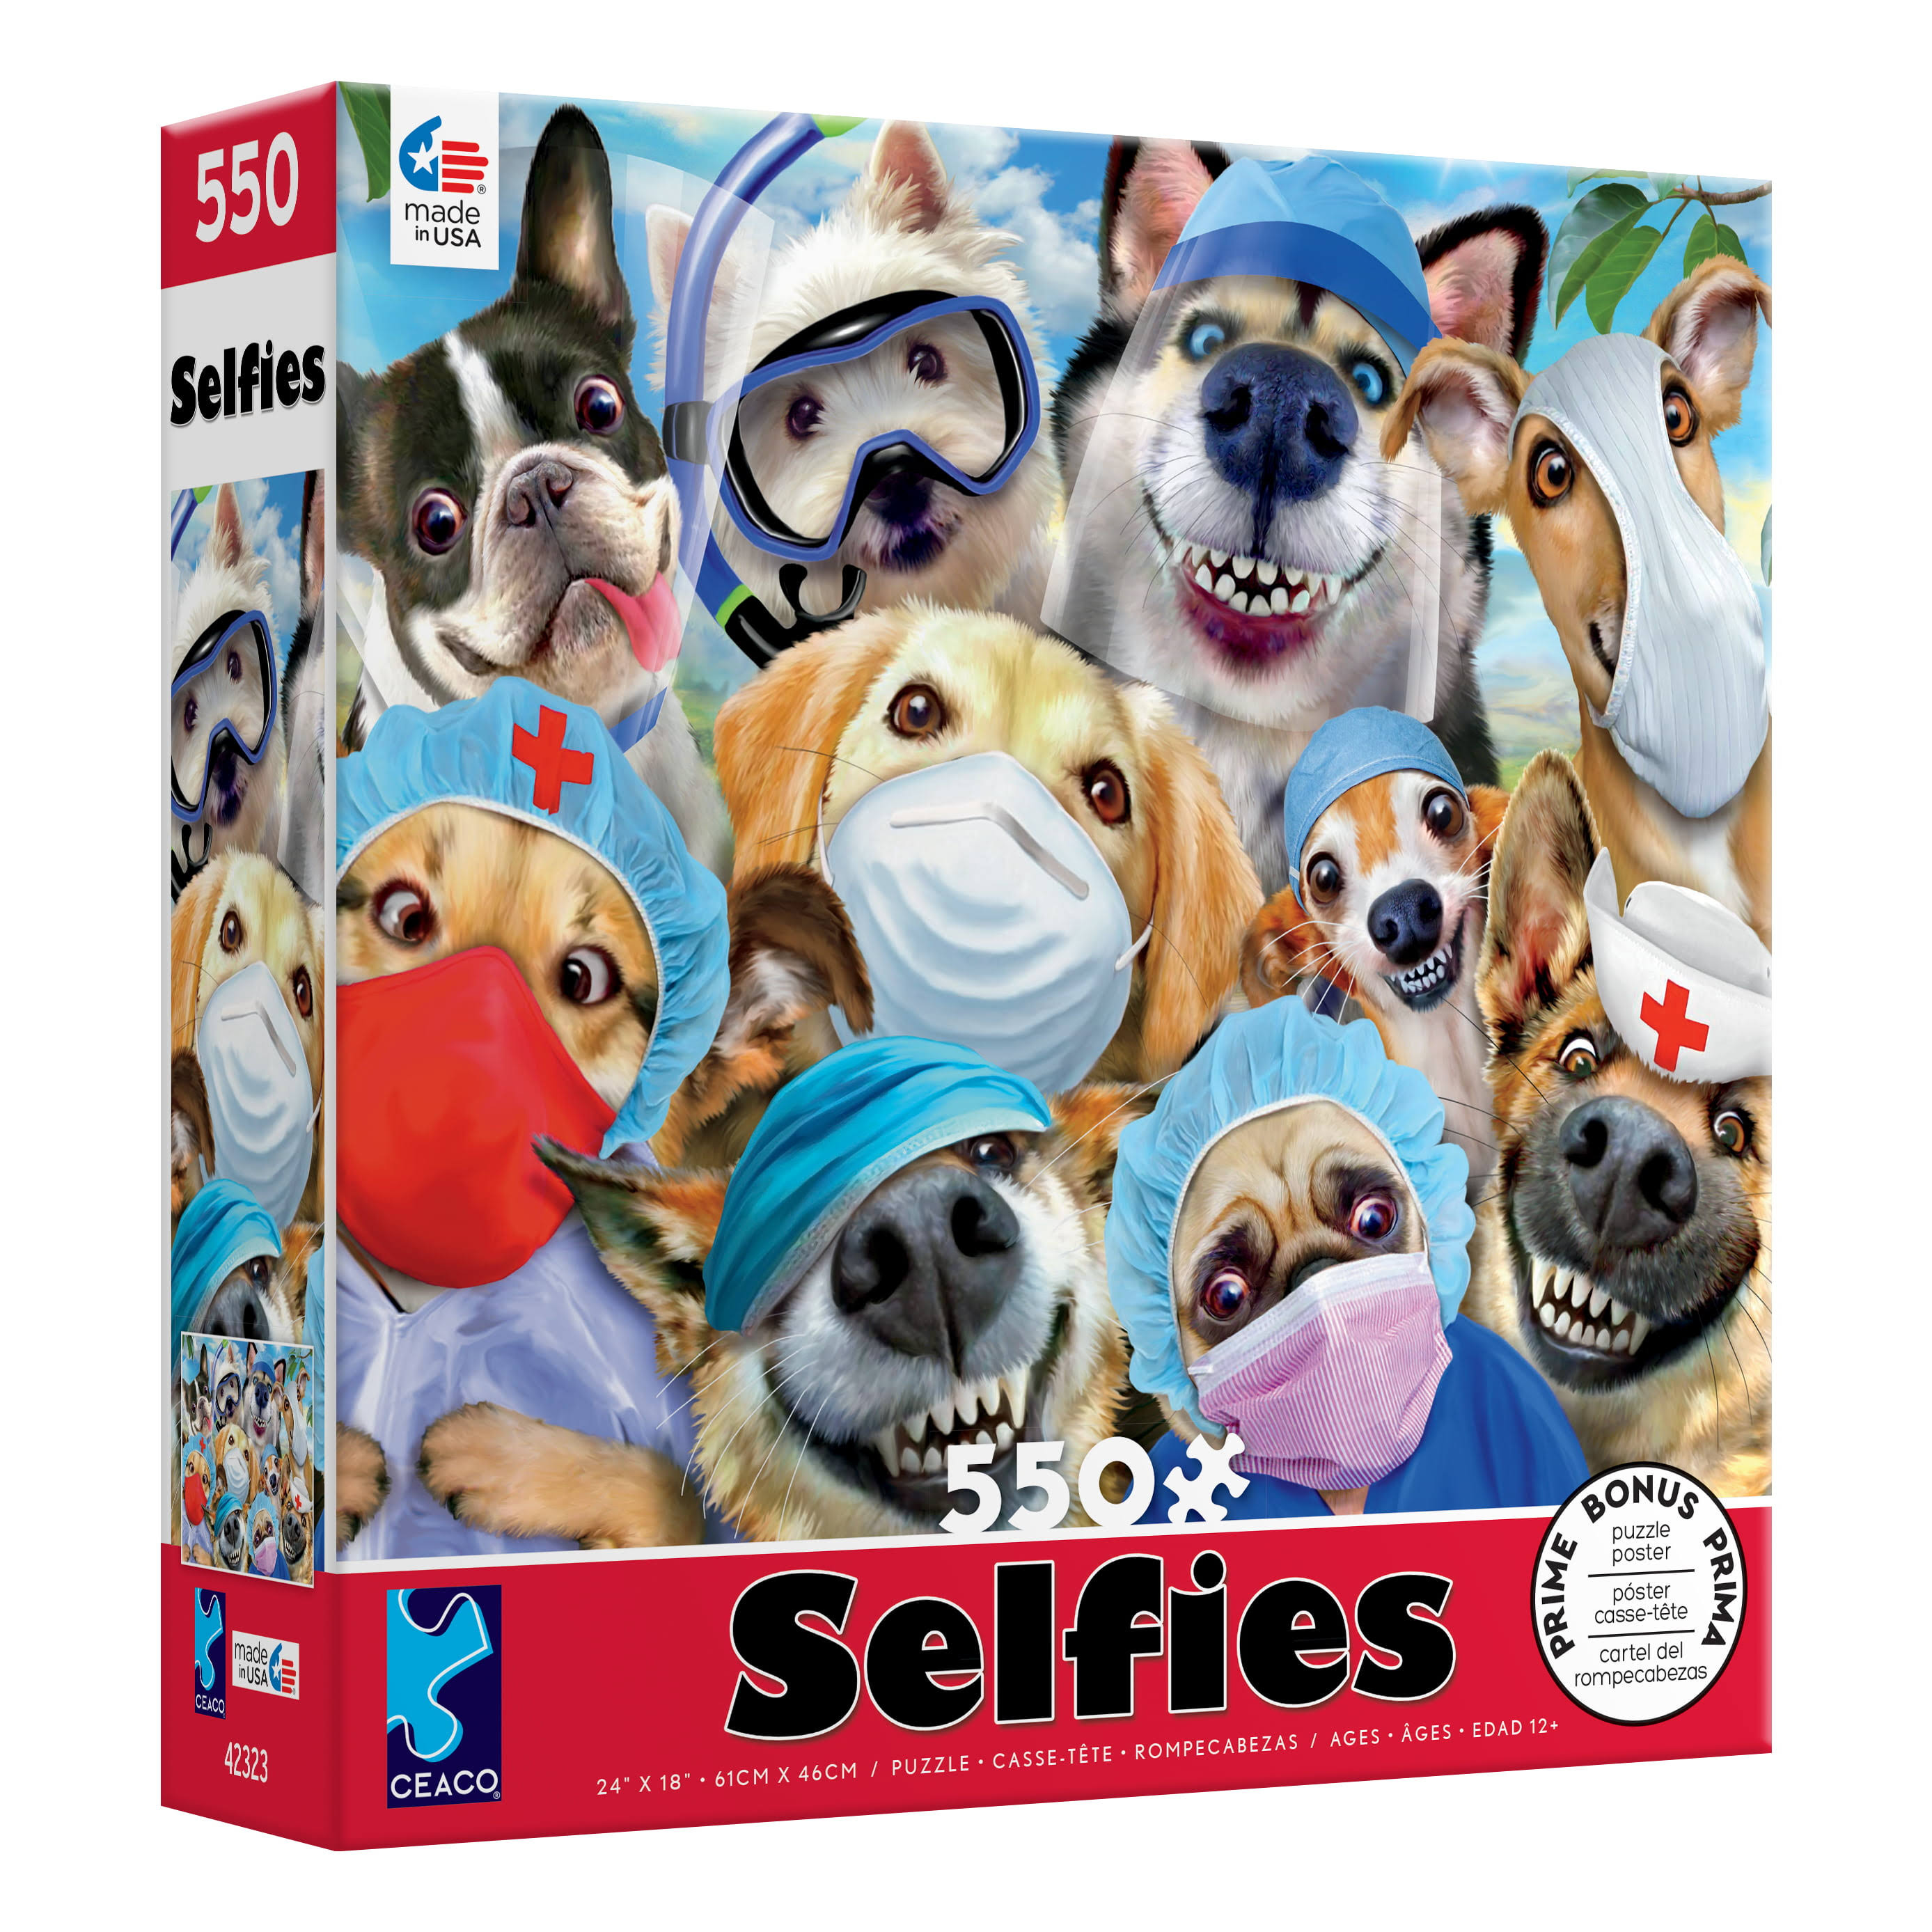 Ceaco - Selfies - Animals Masked Selfies - 550 Piece Jigsaw Puzzle